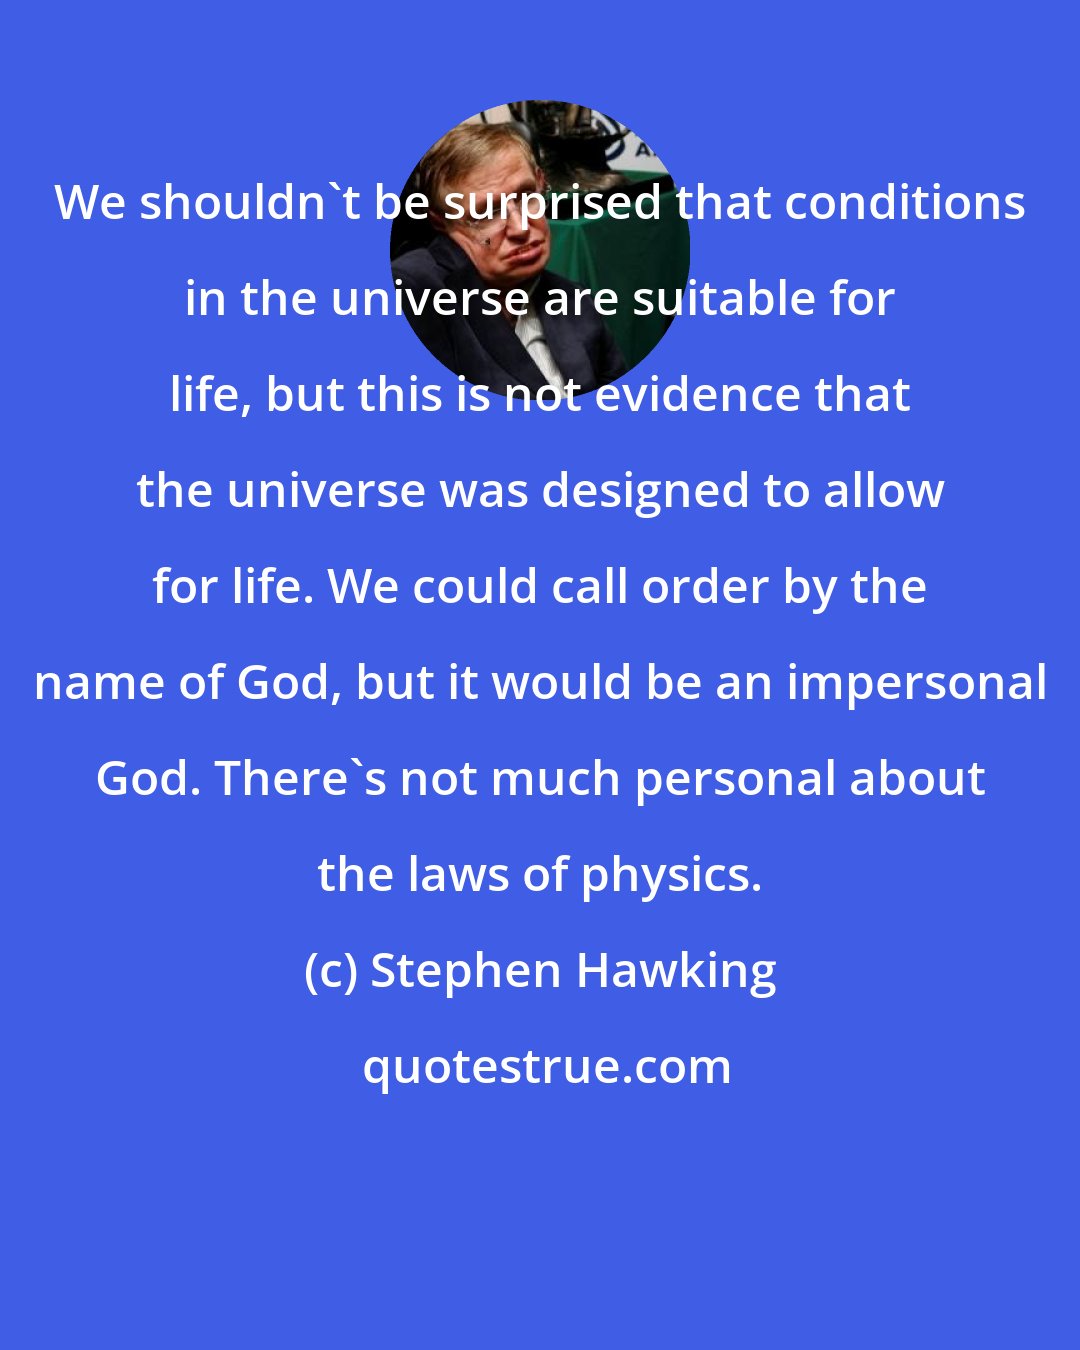 Stephen Hawking: We shouldn't be surprised that conditions in the universe are suitable for life, but this is not evidence that the universe was designed to allow for life. We could call order by the name of God, but it would be an impersonal God. There's not much personal about the laws of physics.